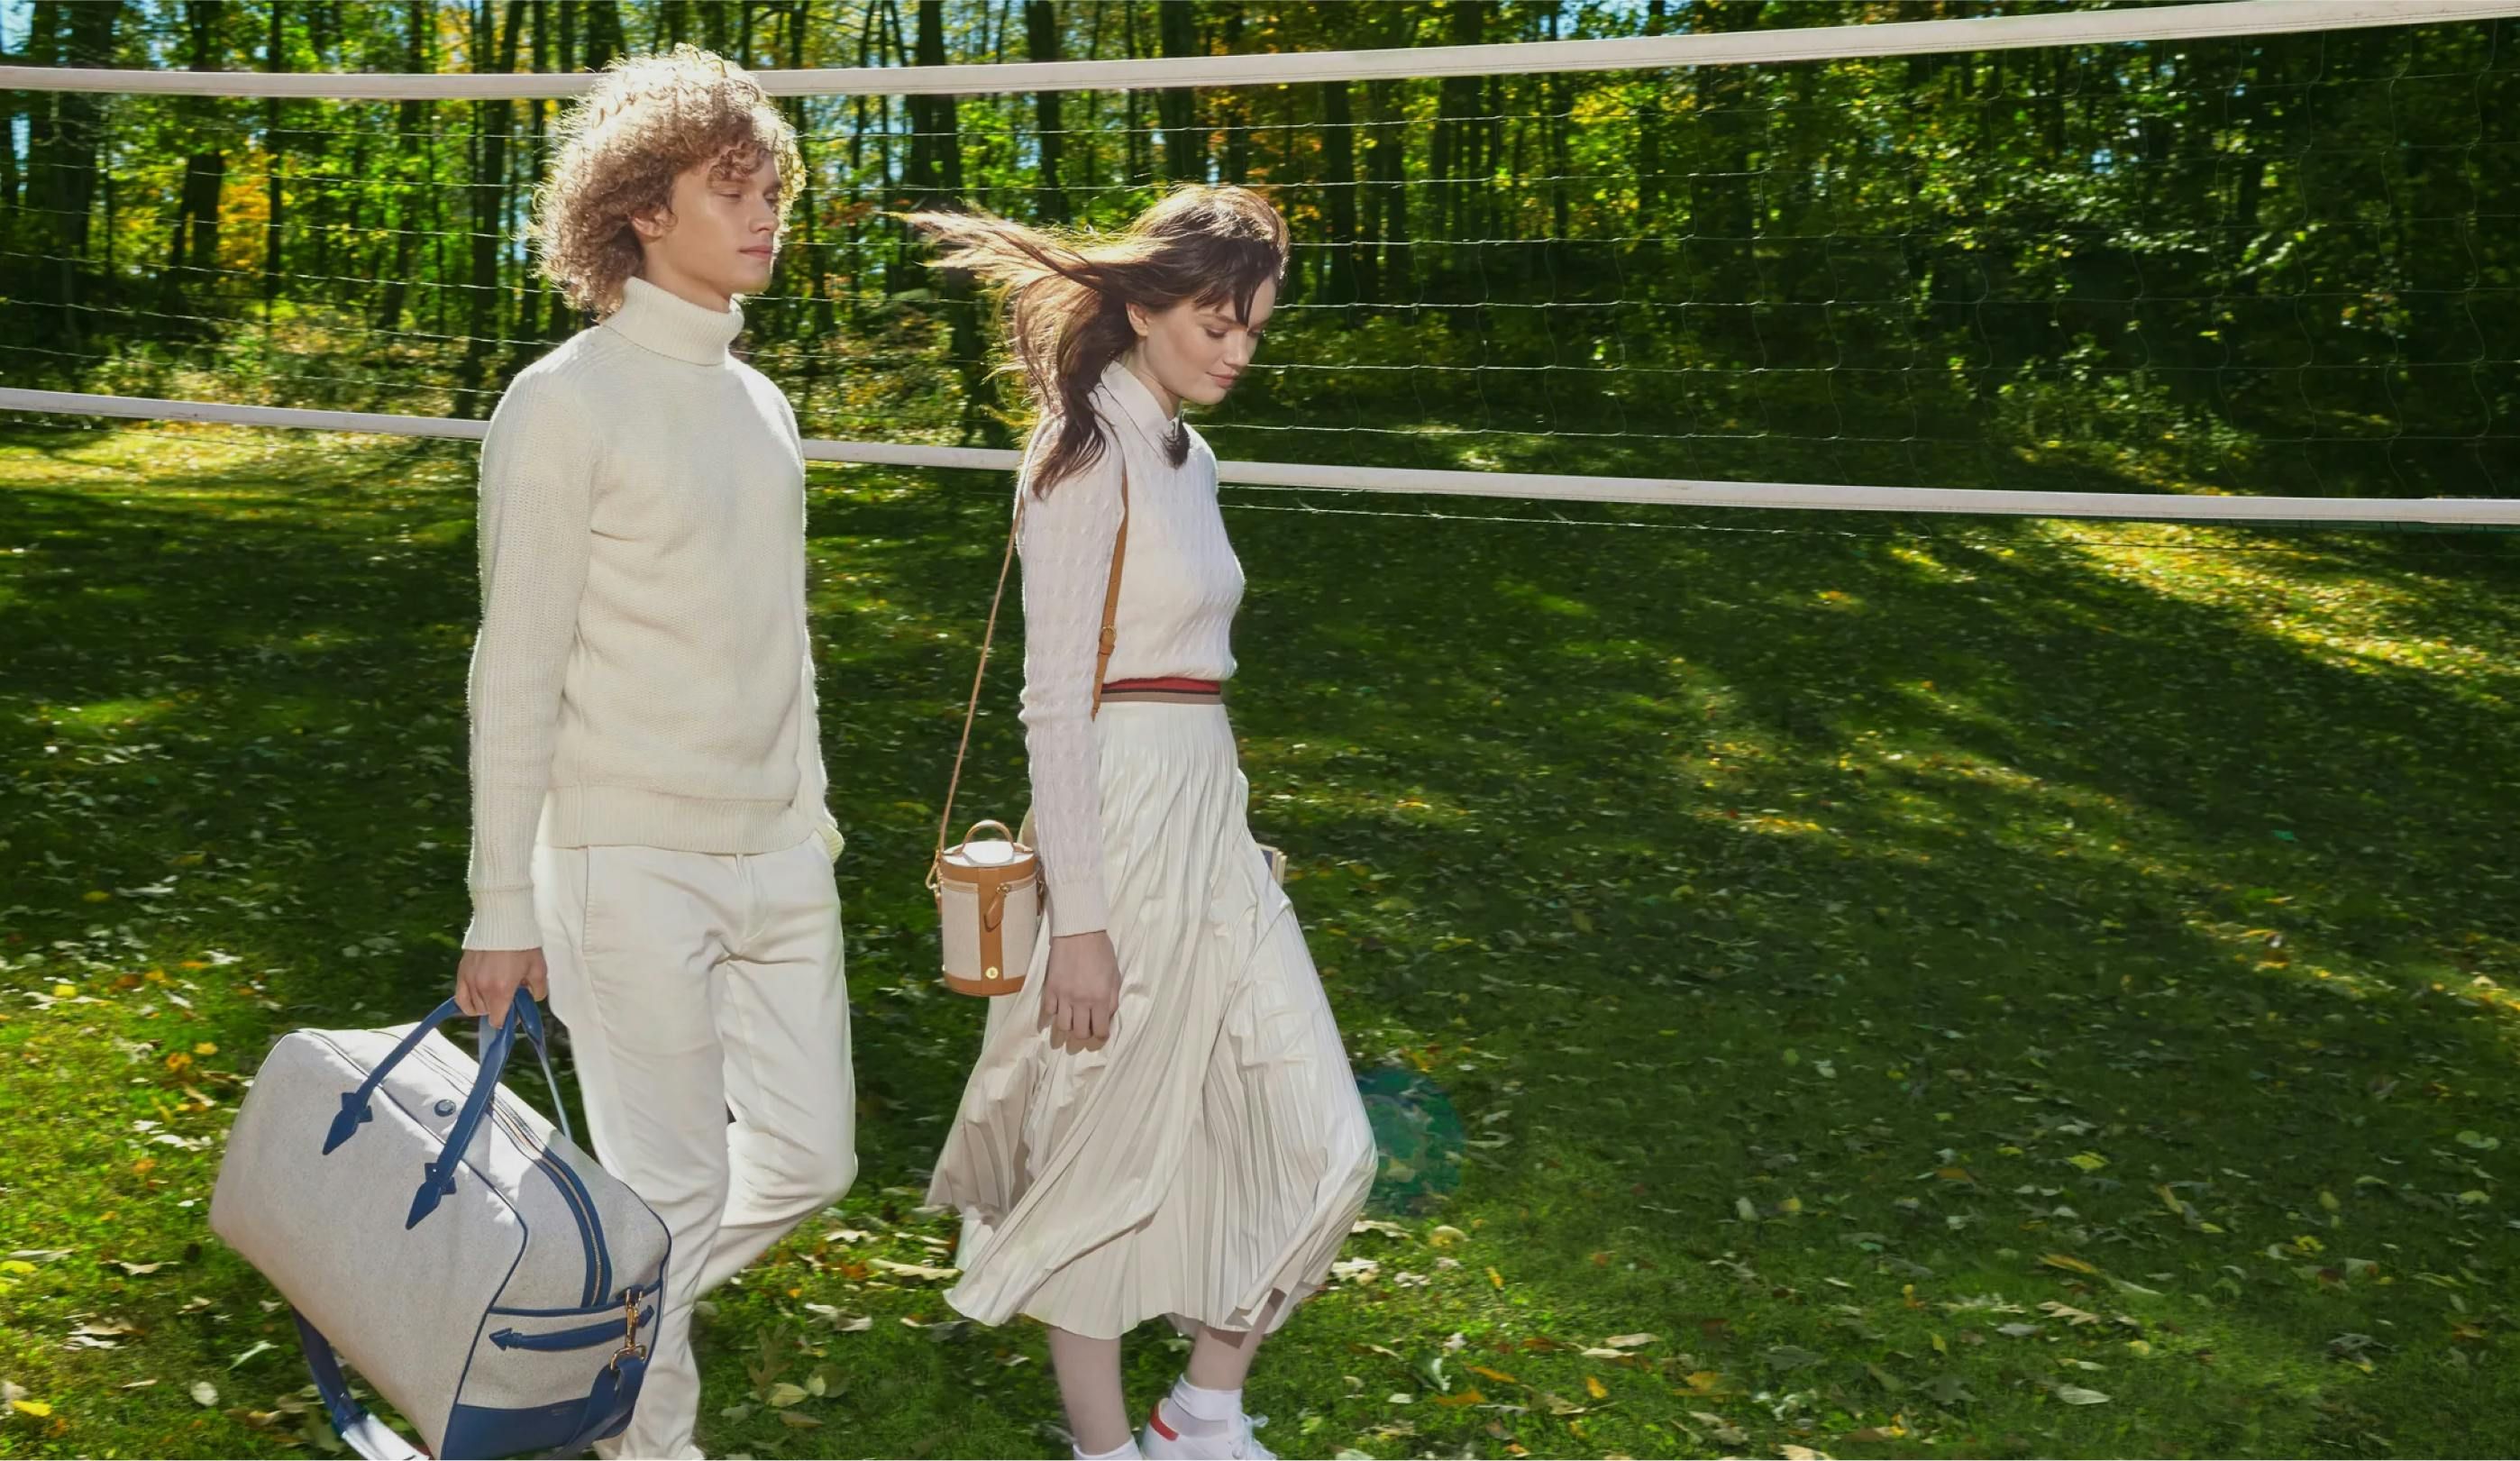 A man and woman walking on a grass volleyball court with their Paravel bags